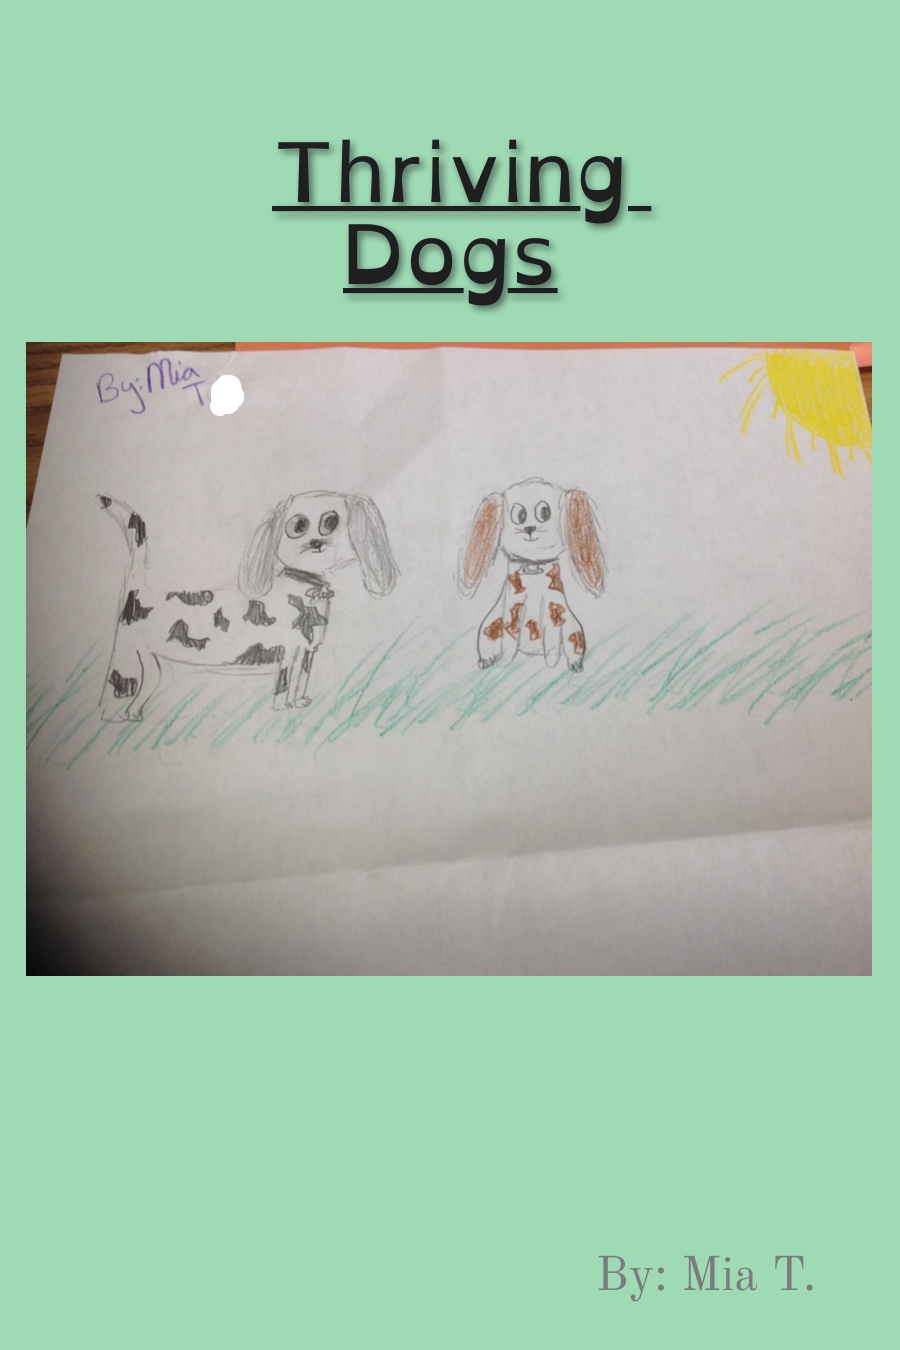 Thriving Dogs by Mia T